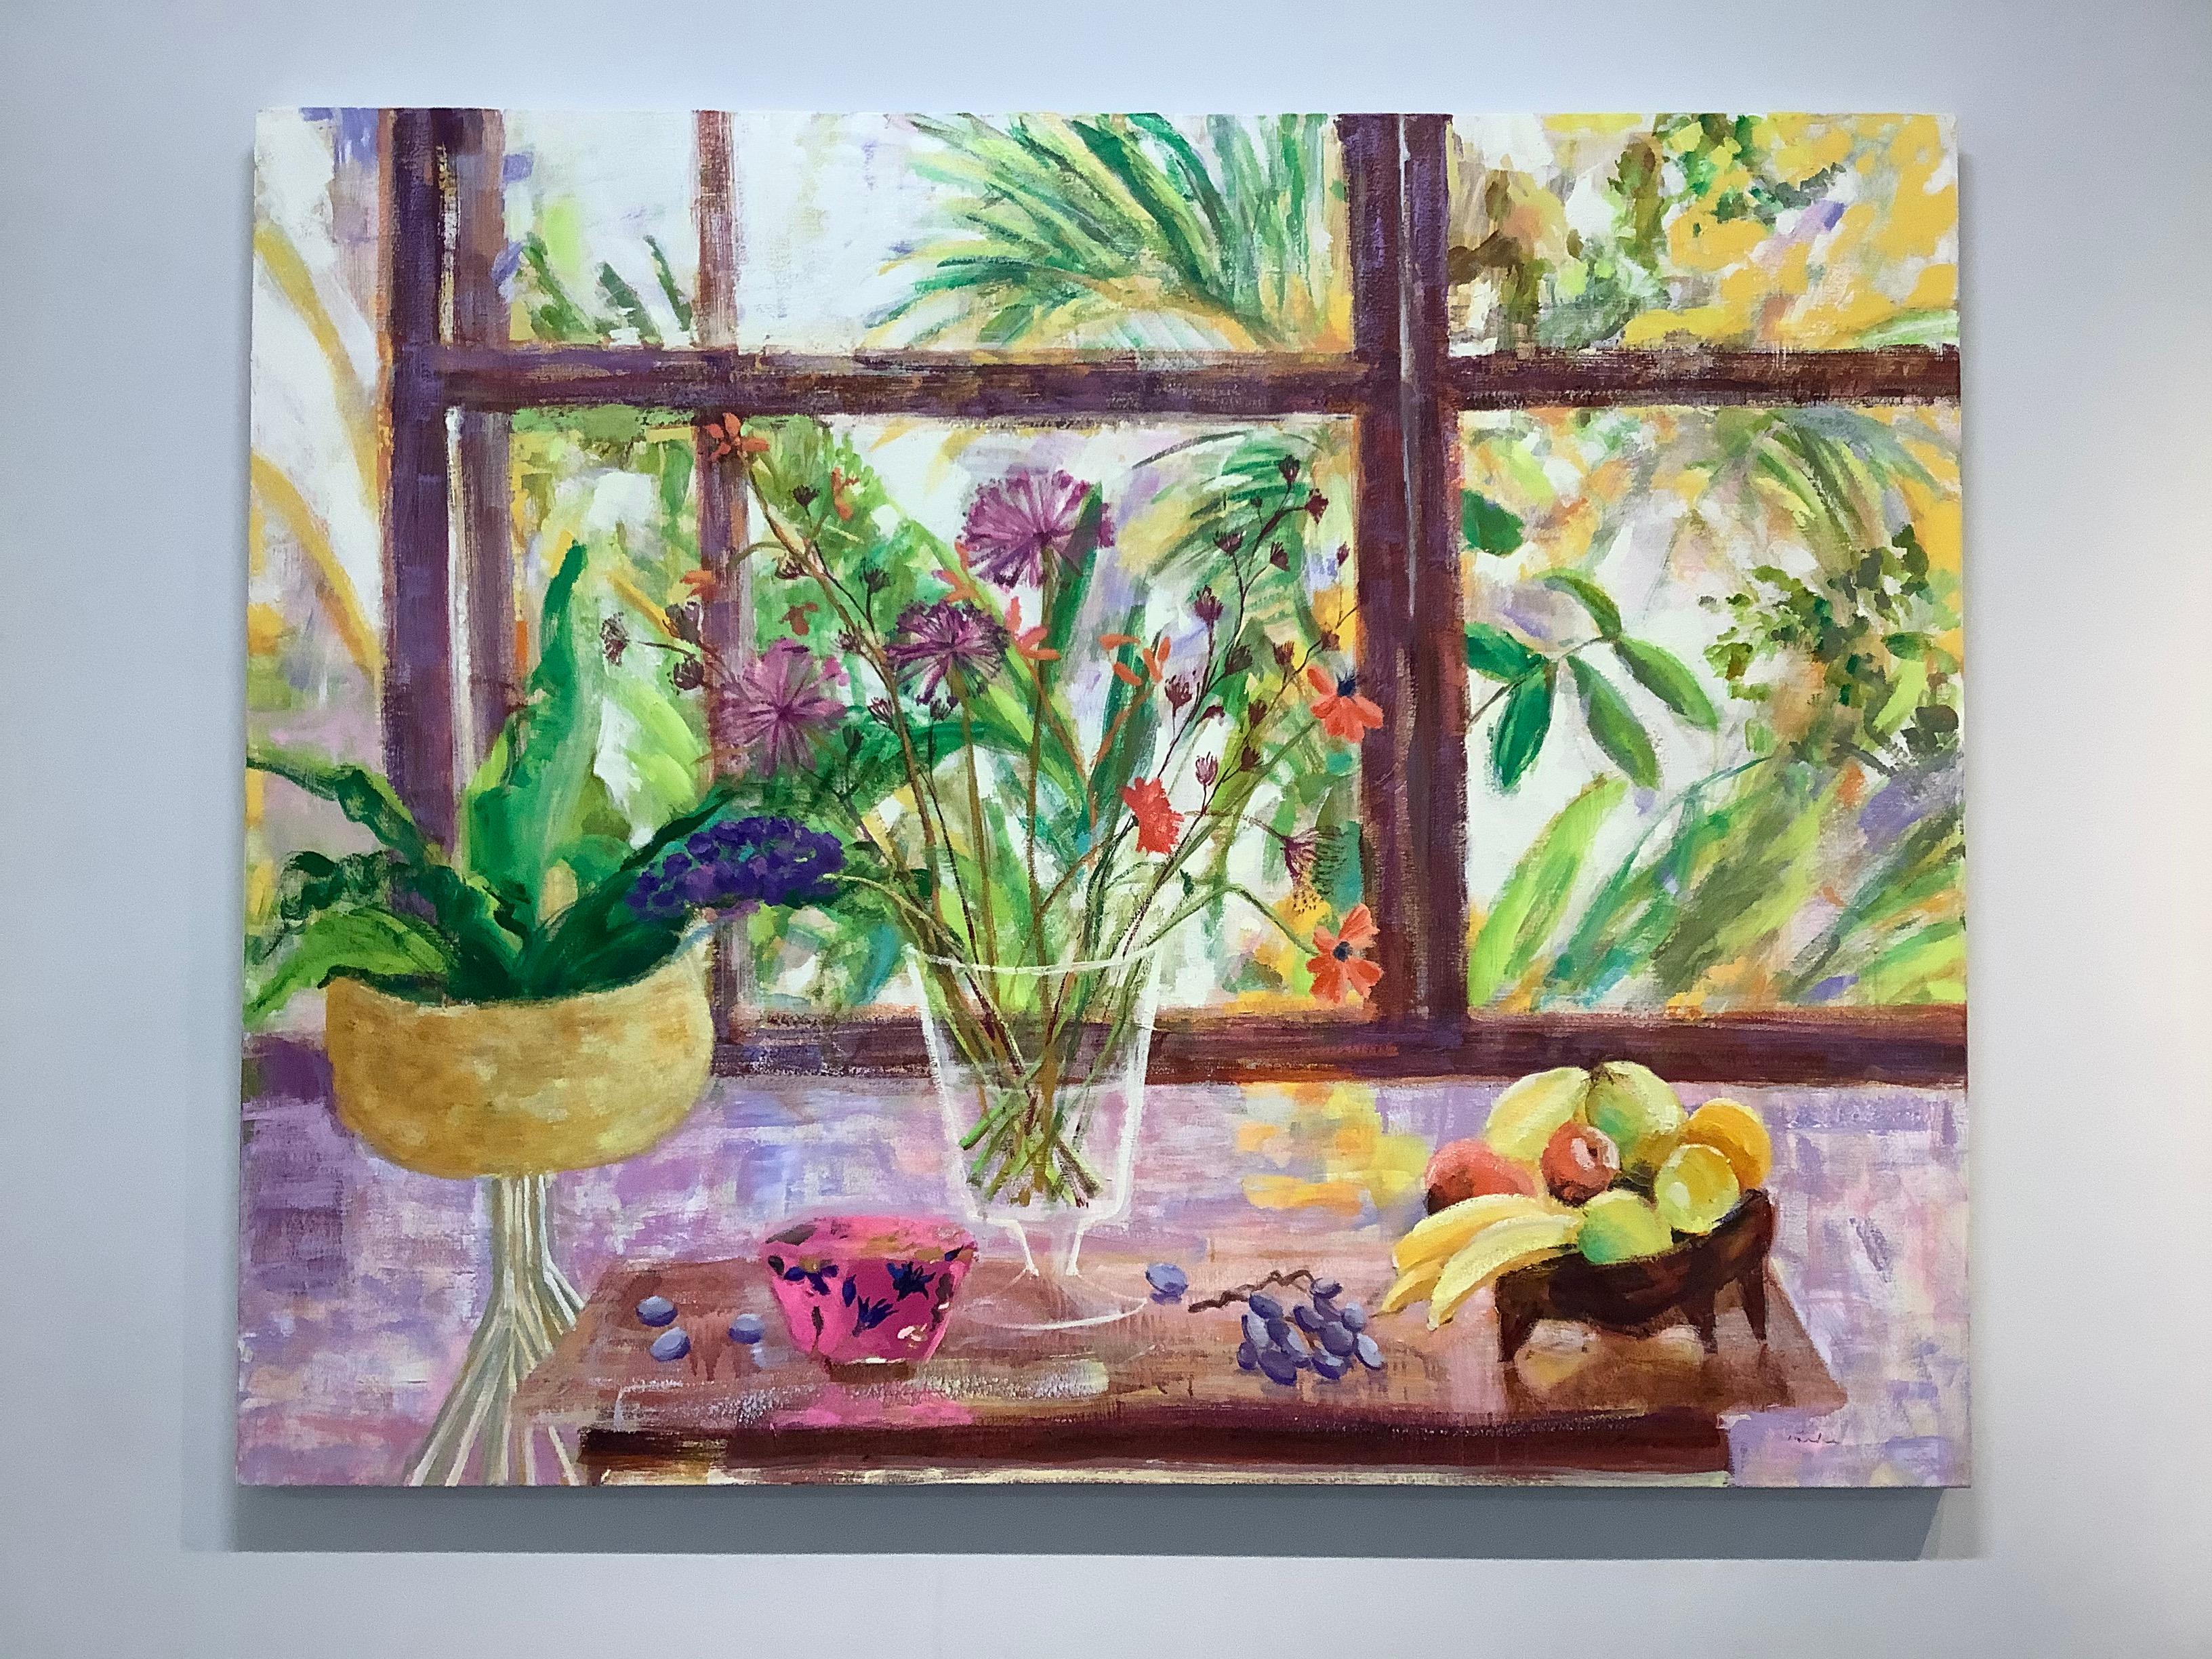 The Flower of My Secret, Purple, Yellow Fruits Dining Room Botanical Still Life - Painting by Melanie Parke